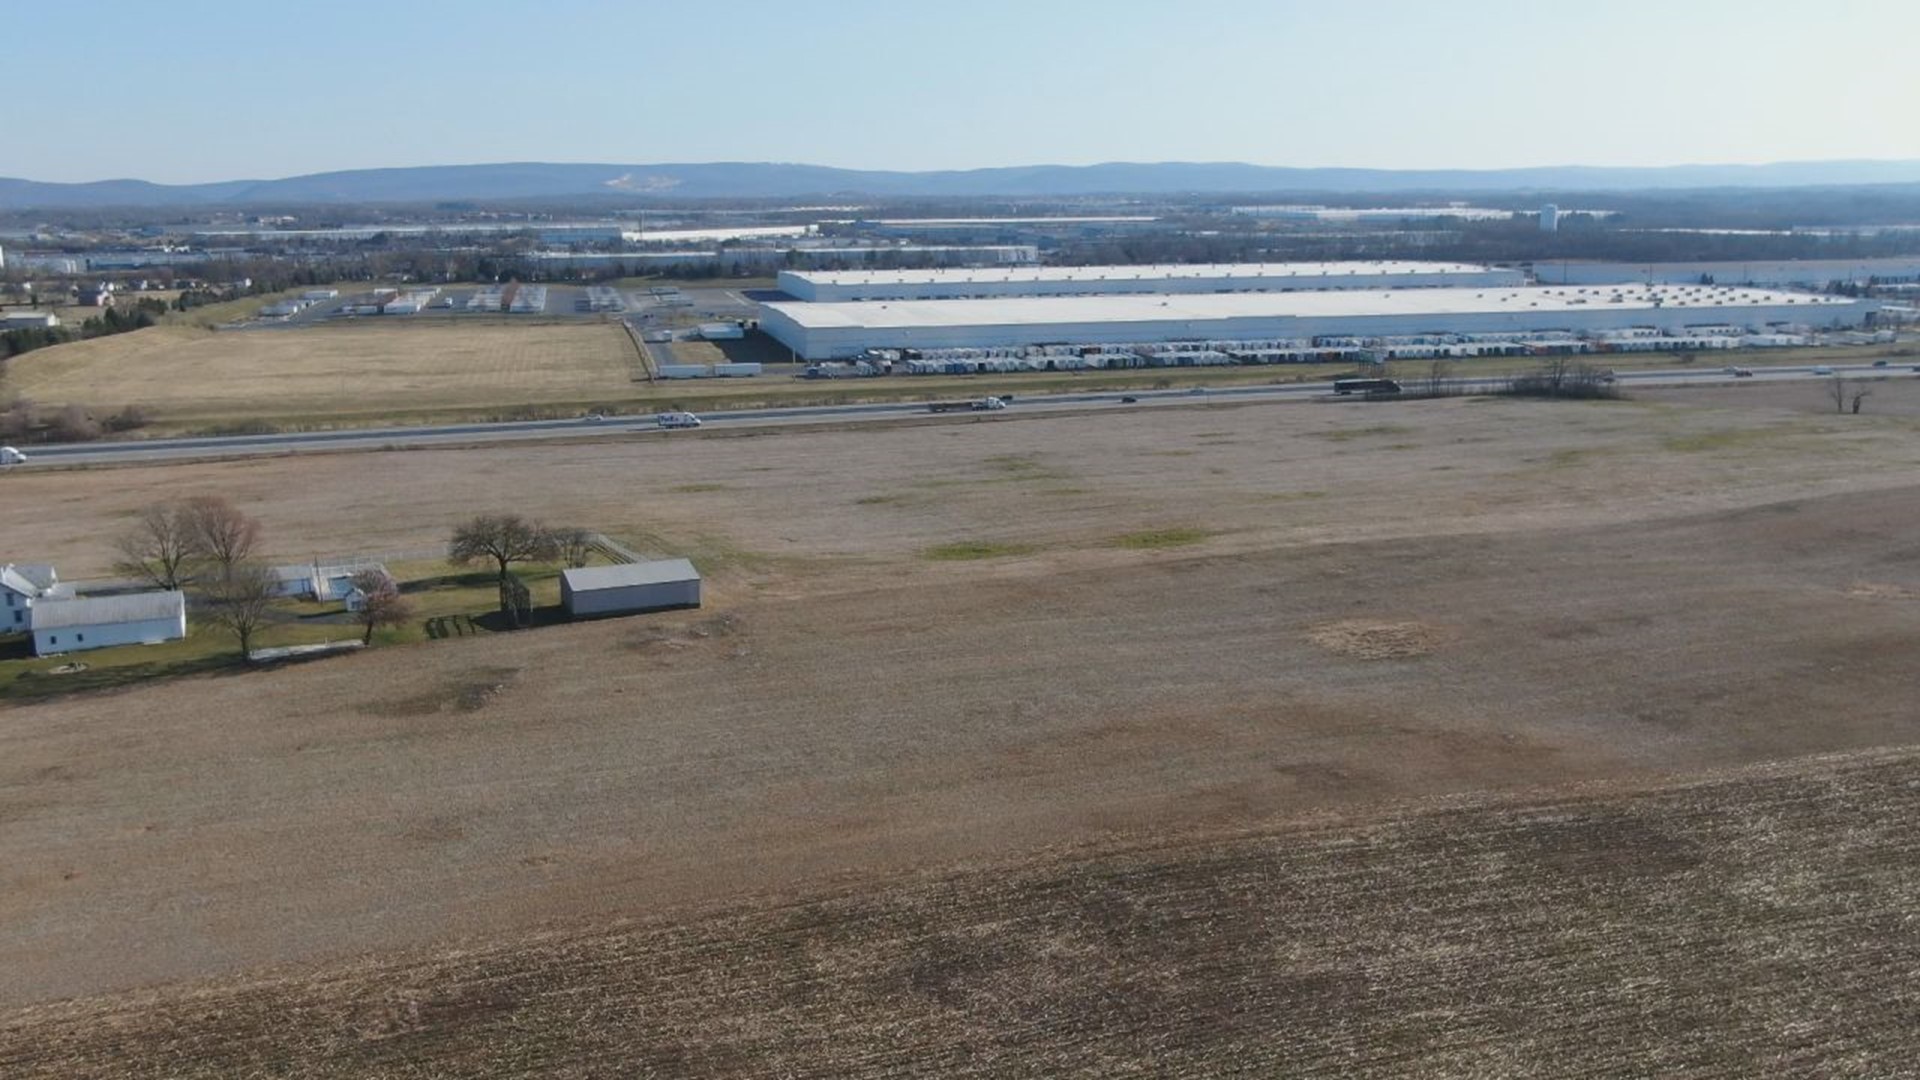 The Board of Supervisors voted to adopt a change to the zoning proposal that would turn 150+ acres of farmland into a potential warehouse.